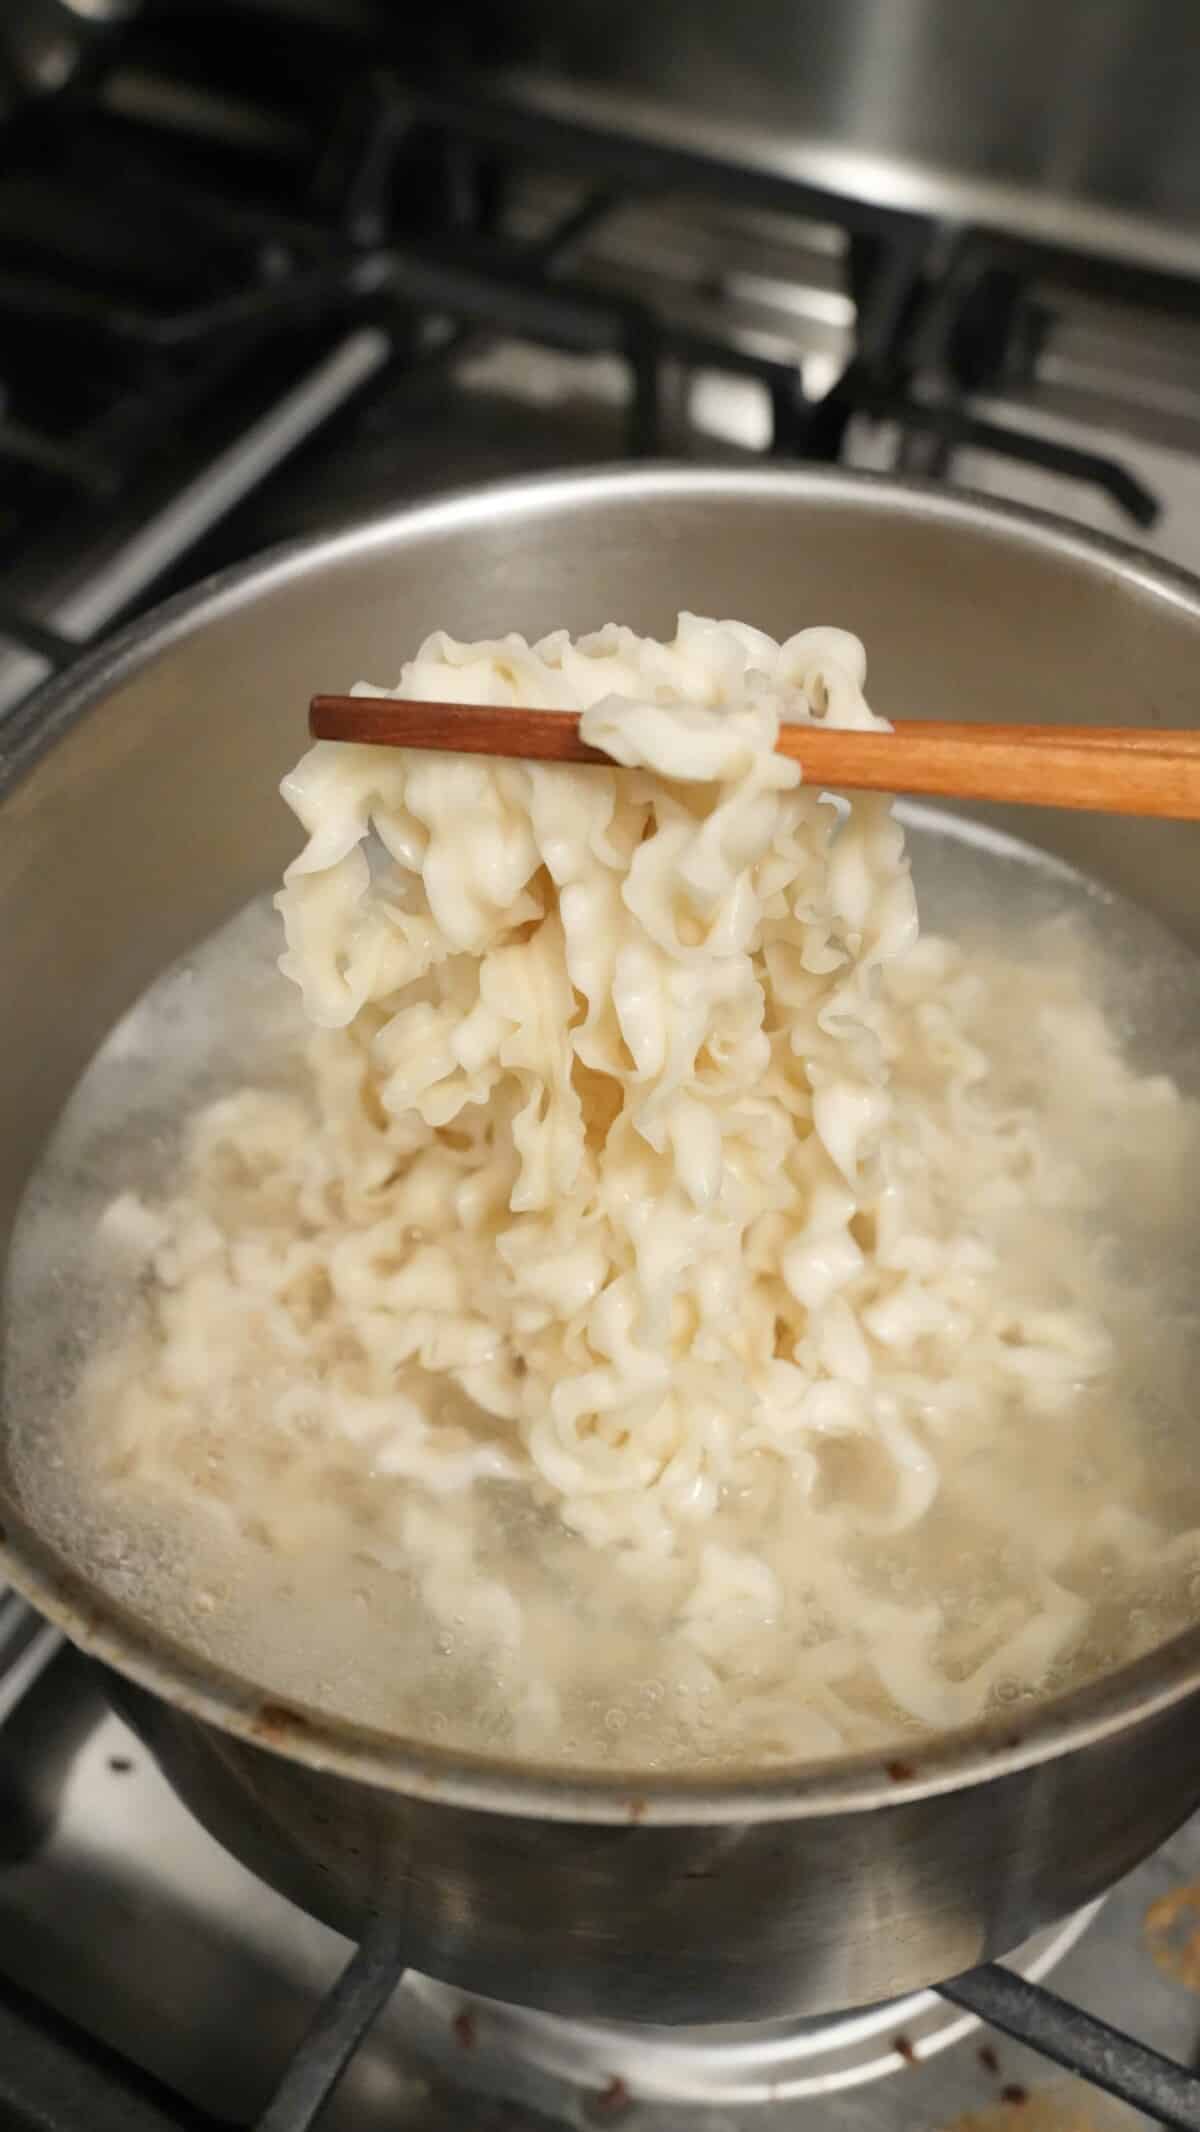 Knife cut wheat noodles cooked in boiling water.